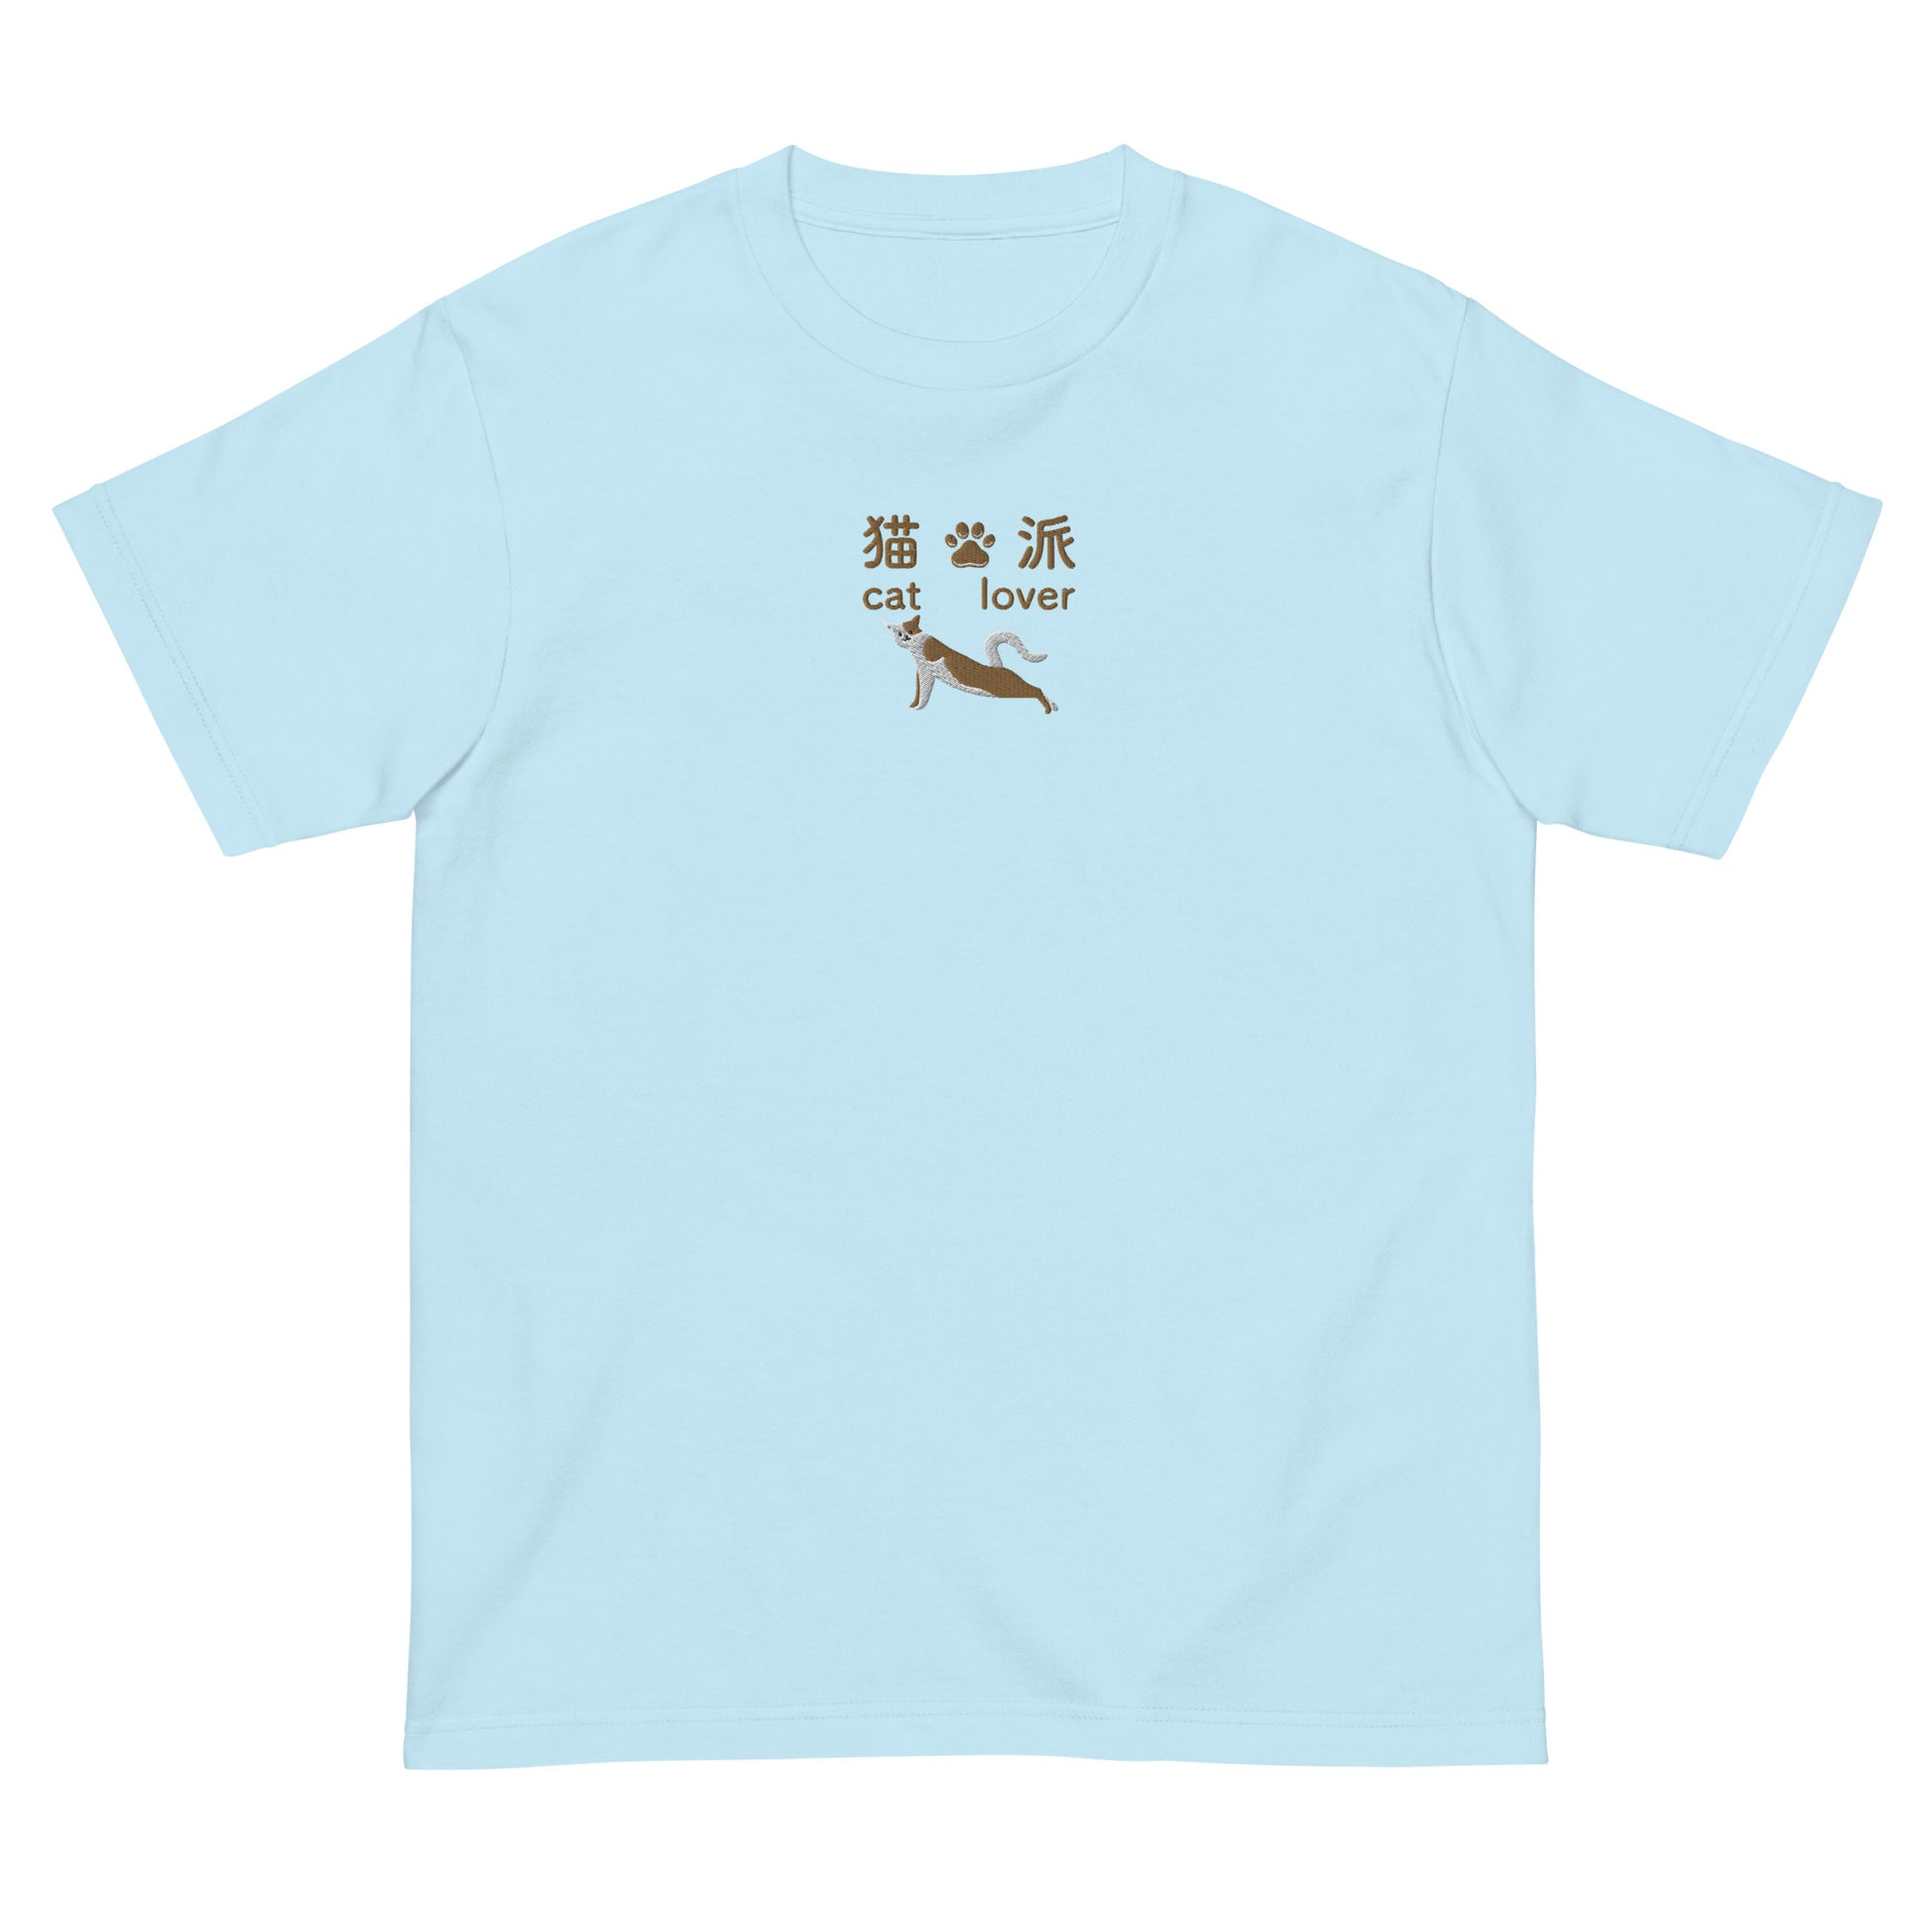 Light Blue High Quality Tee - Front Design with an Brown, White Embroidery "Cat Lover" in Japanese,Chinese and English, and Cat  Embroidery 